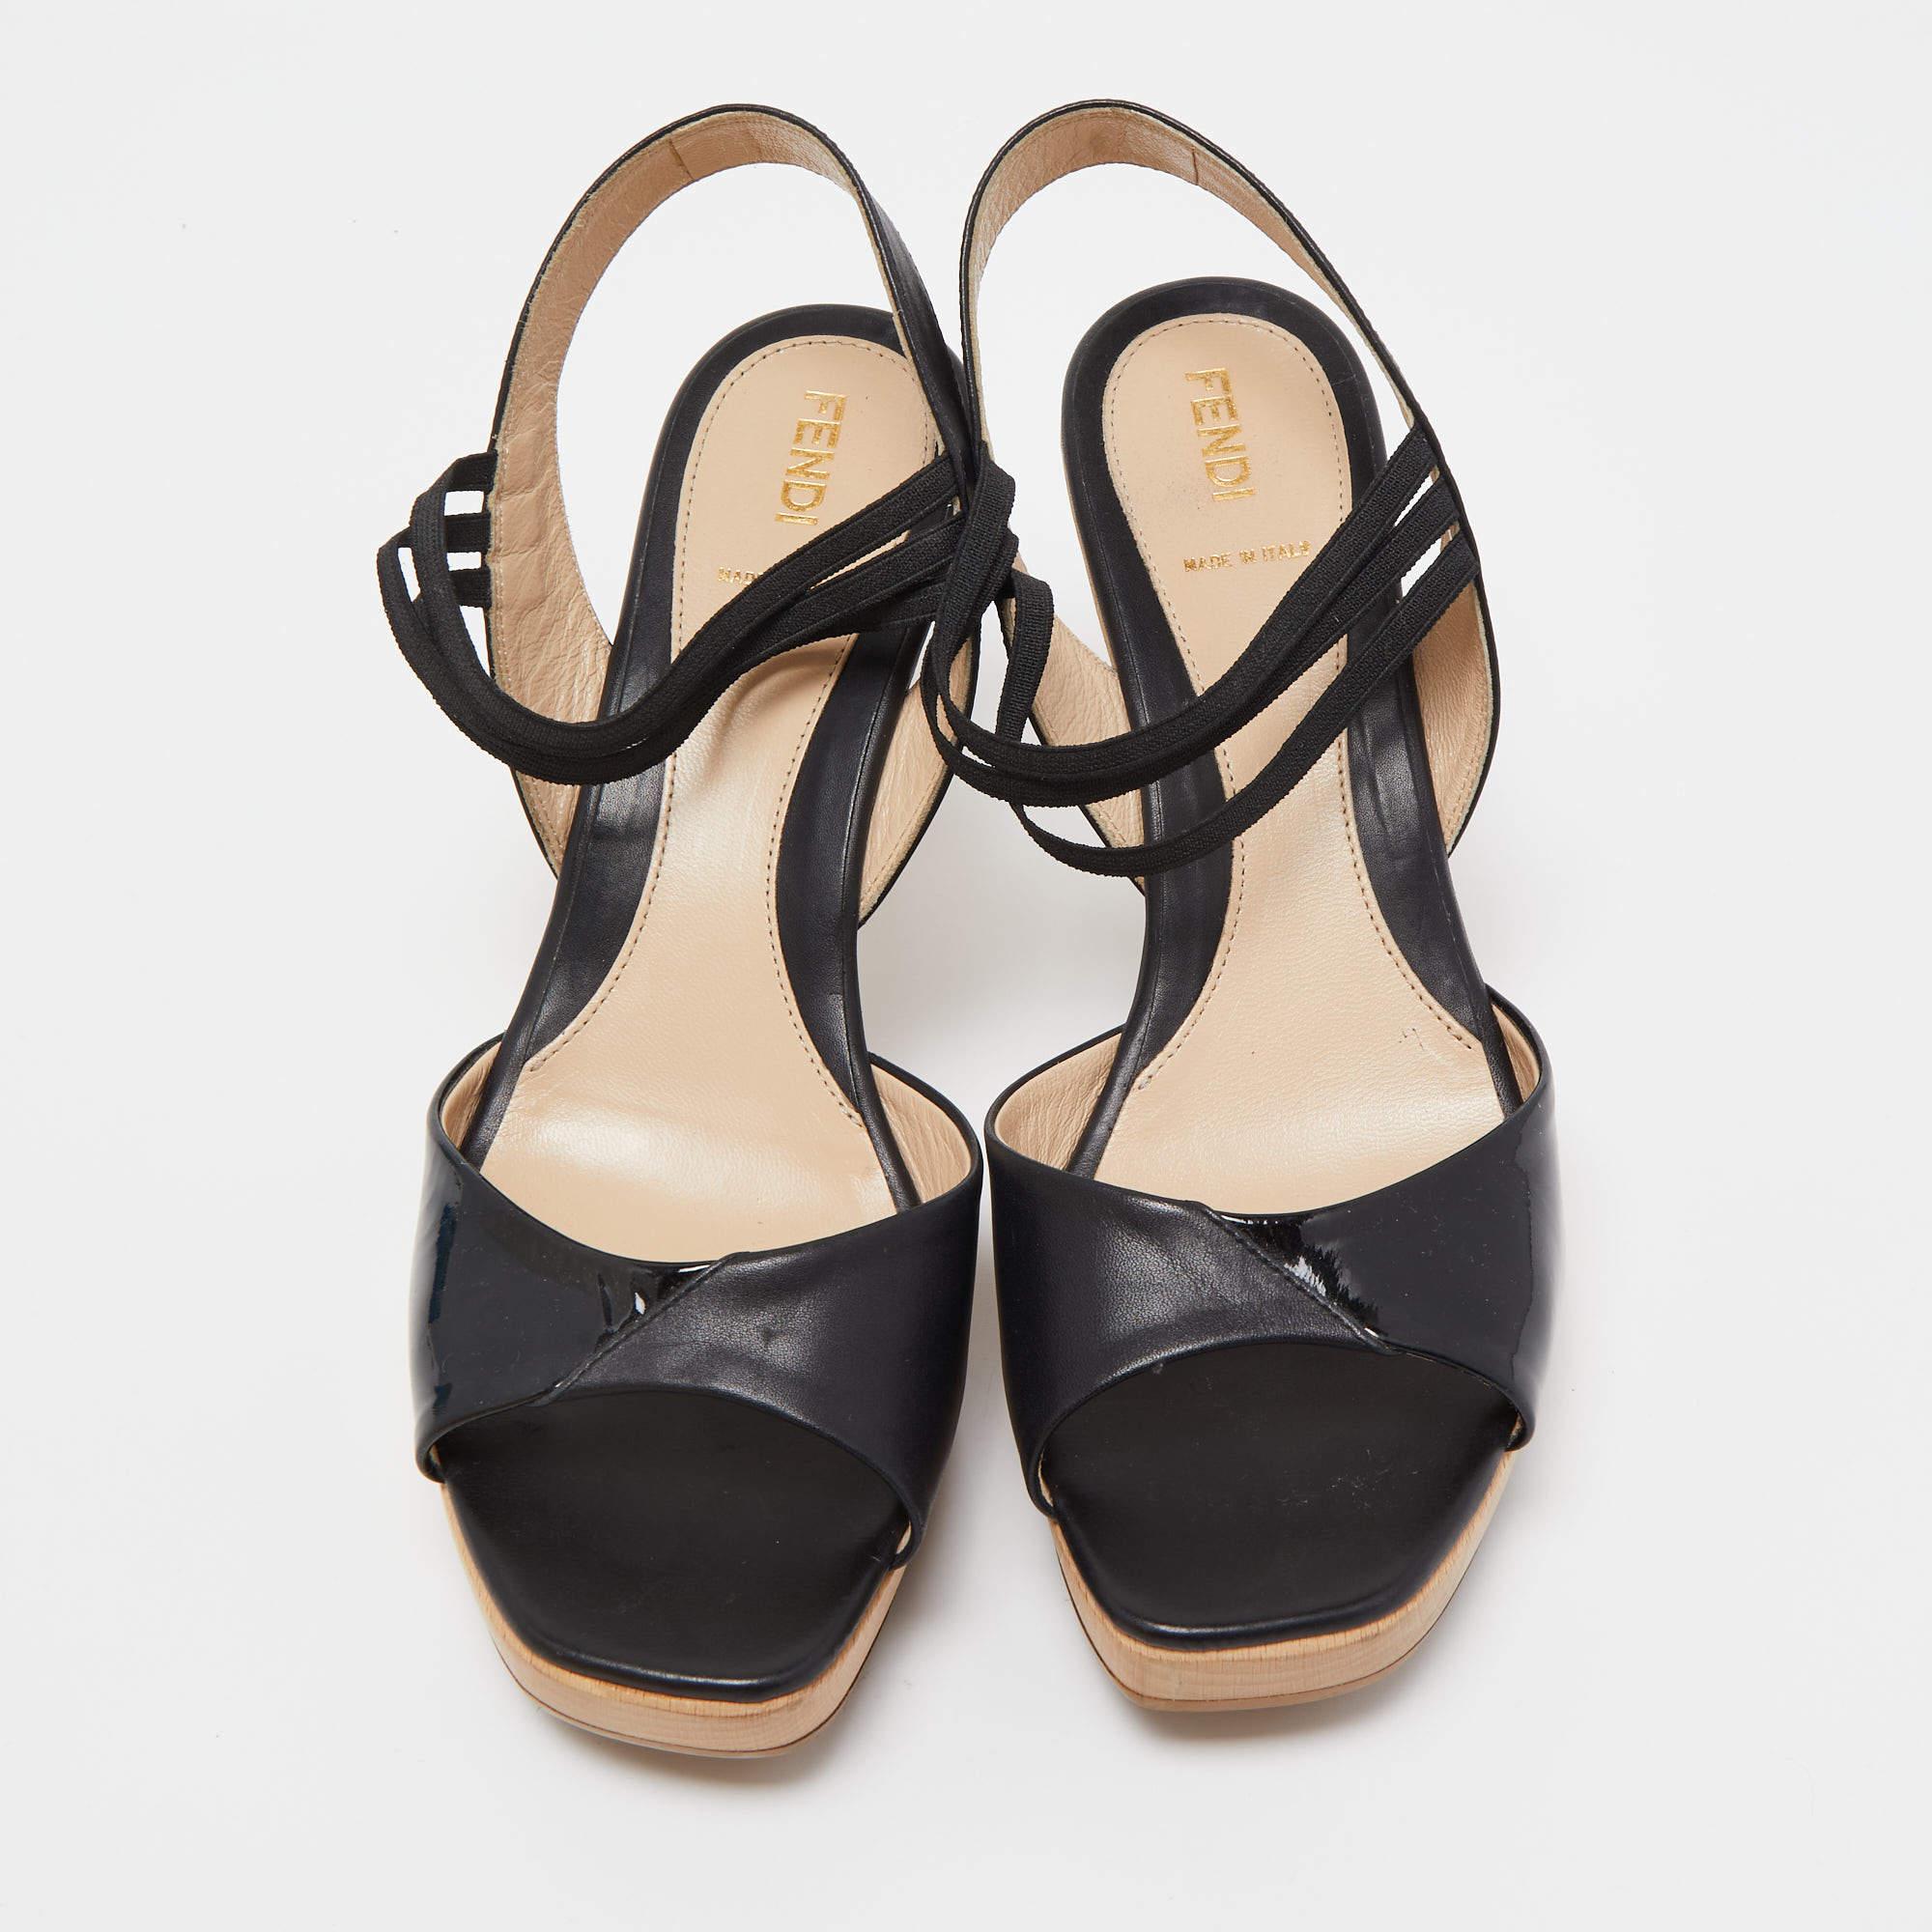 Wear these designer sandals to spruce up any outfit. They are versatile, chic, and can be easily styled. Made using quality materials, these sandals are well-built and long-lasting.

Includes: Original Box, Extra Heel Tips

